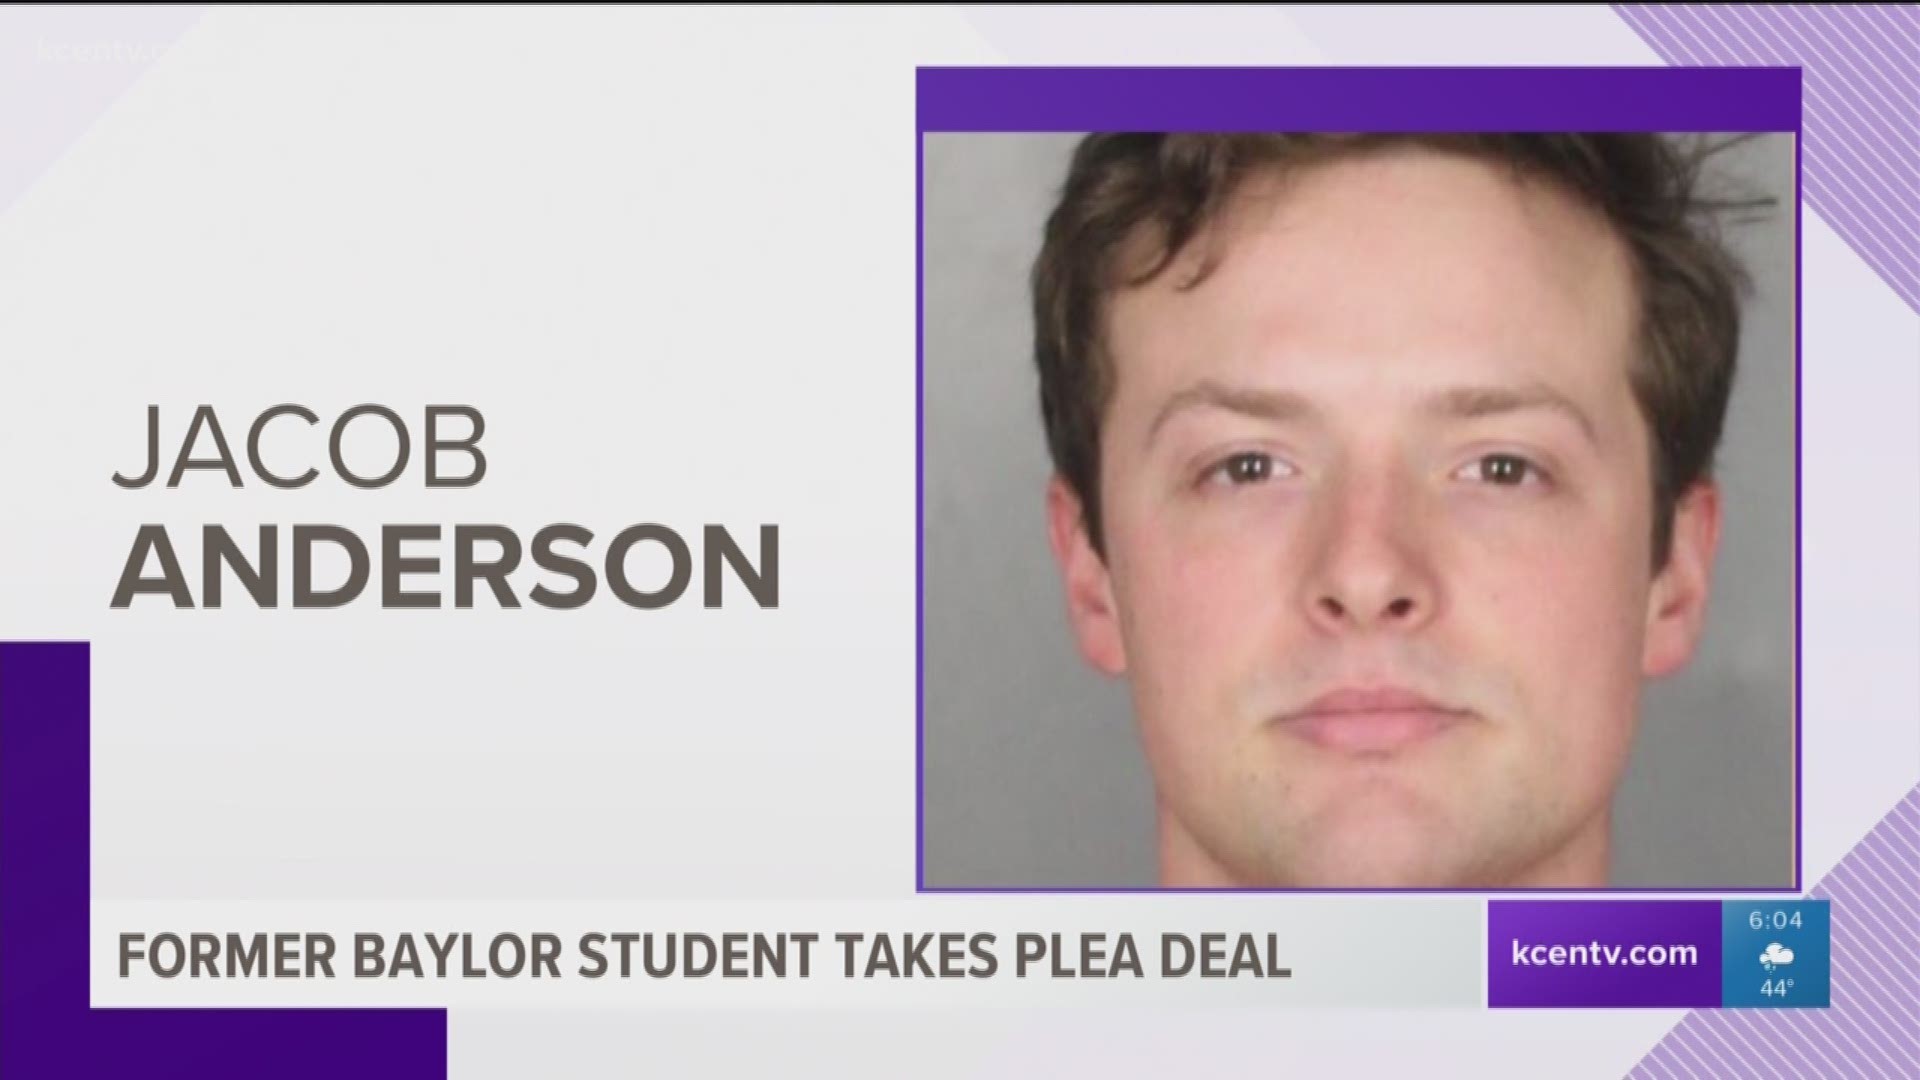 20-year-old Jacob Anderson is accused of drugging and raping a fellow Baylor University student on Feb. 21, 2016.